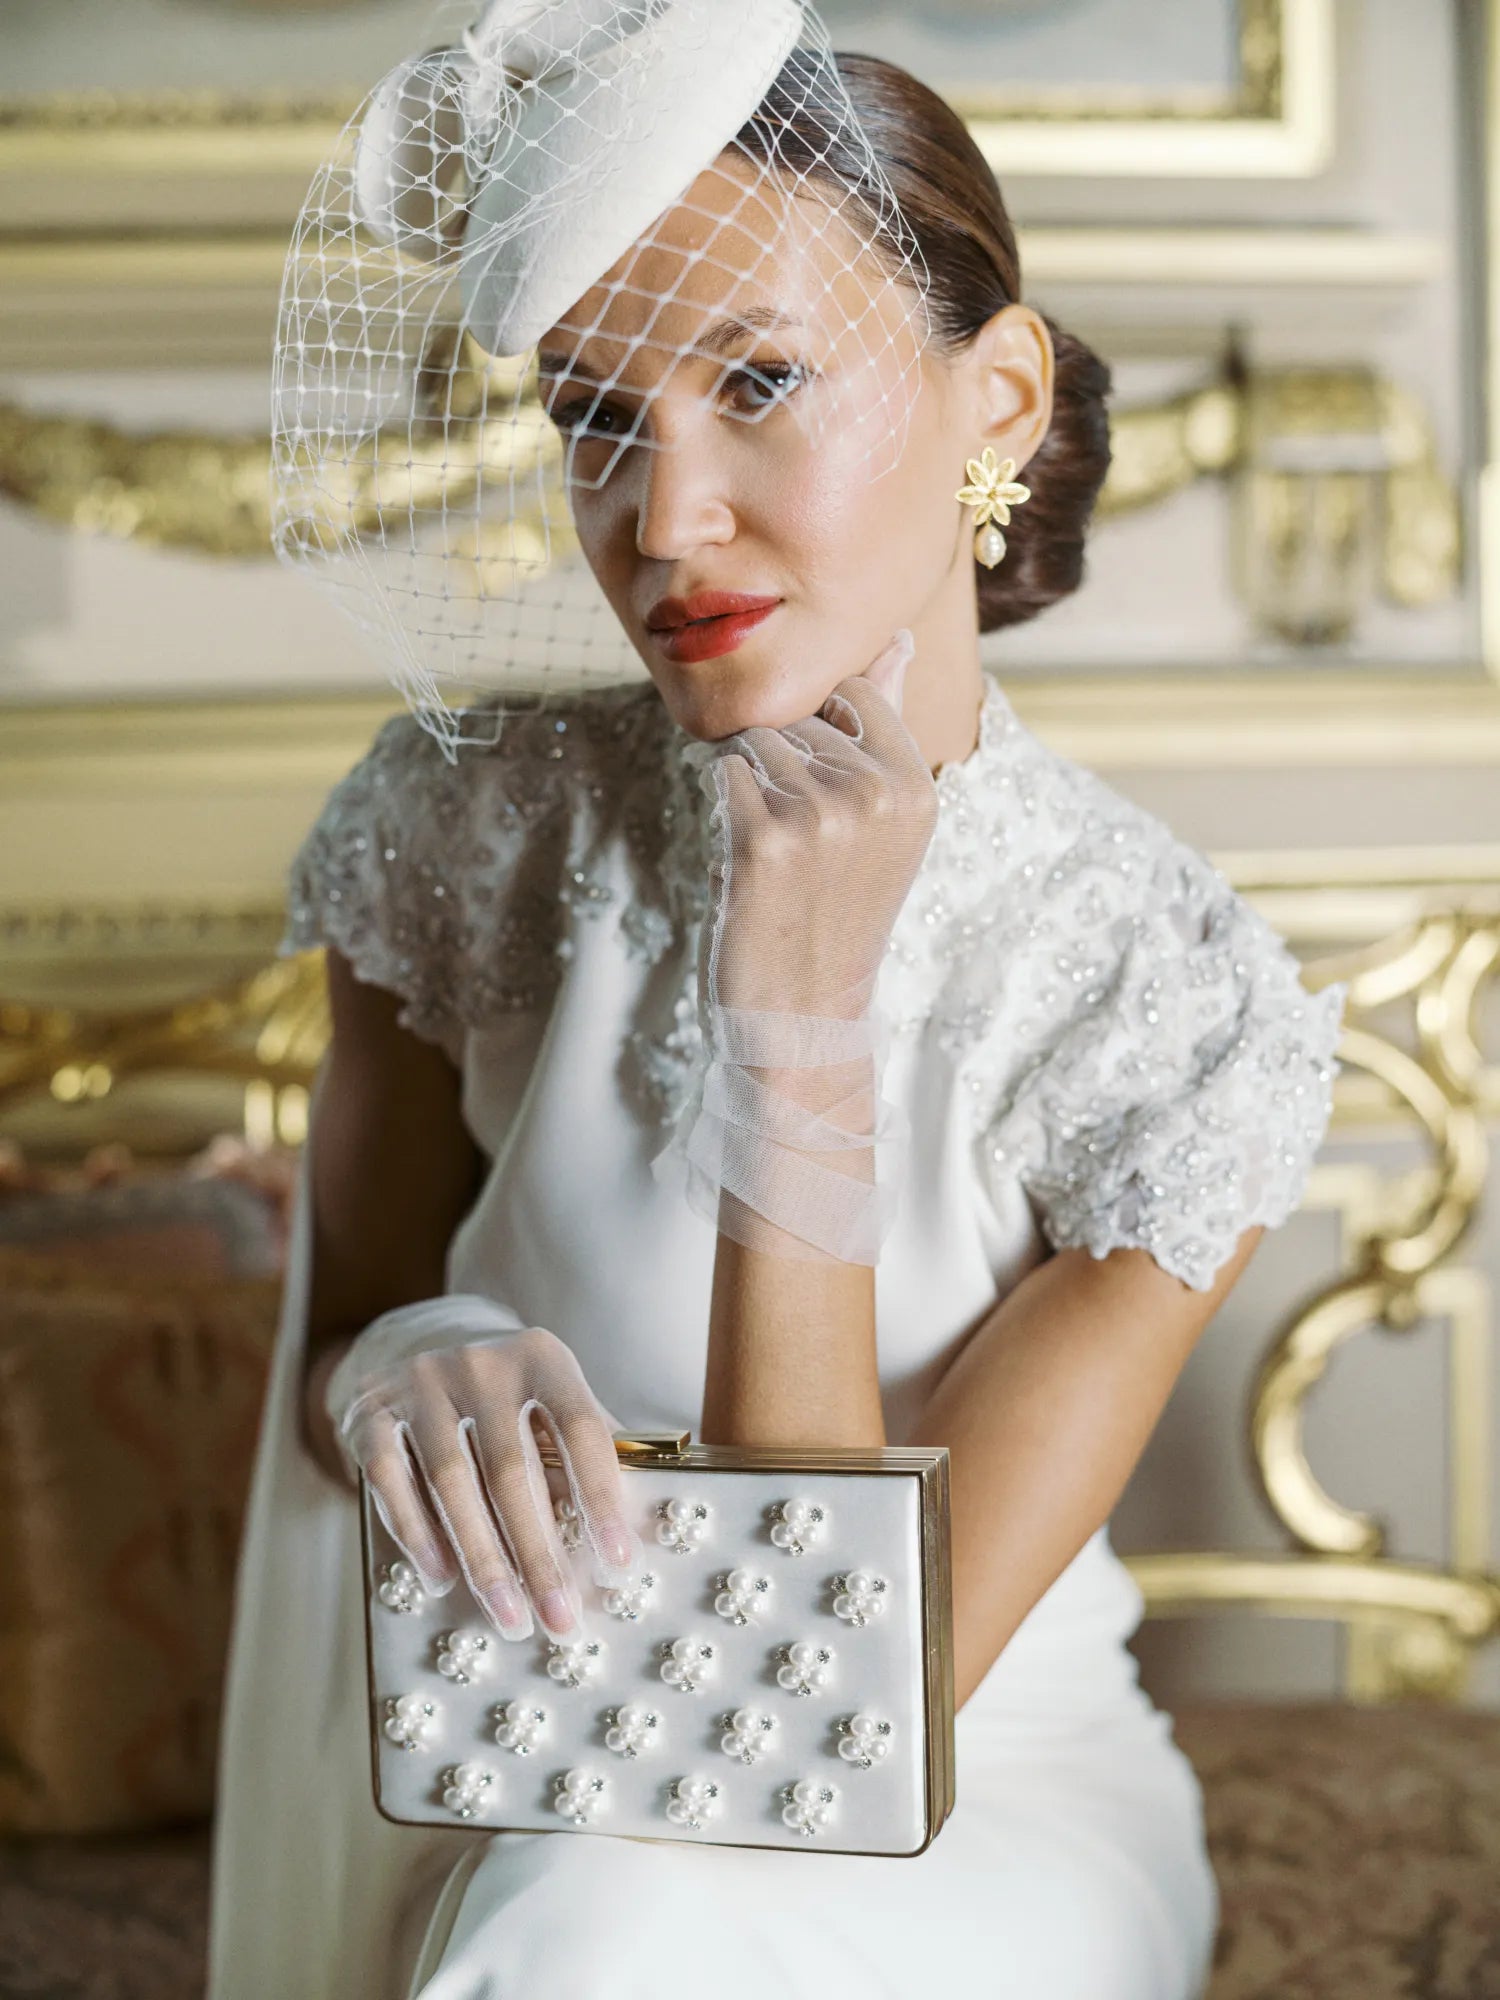 Woman in wedding dress &amp; wedding hat wearing tulle white gloves holding white satin clutch.